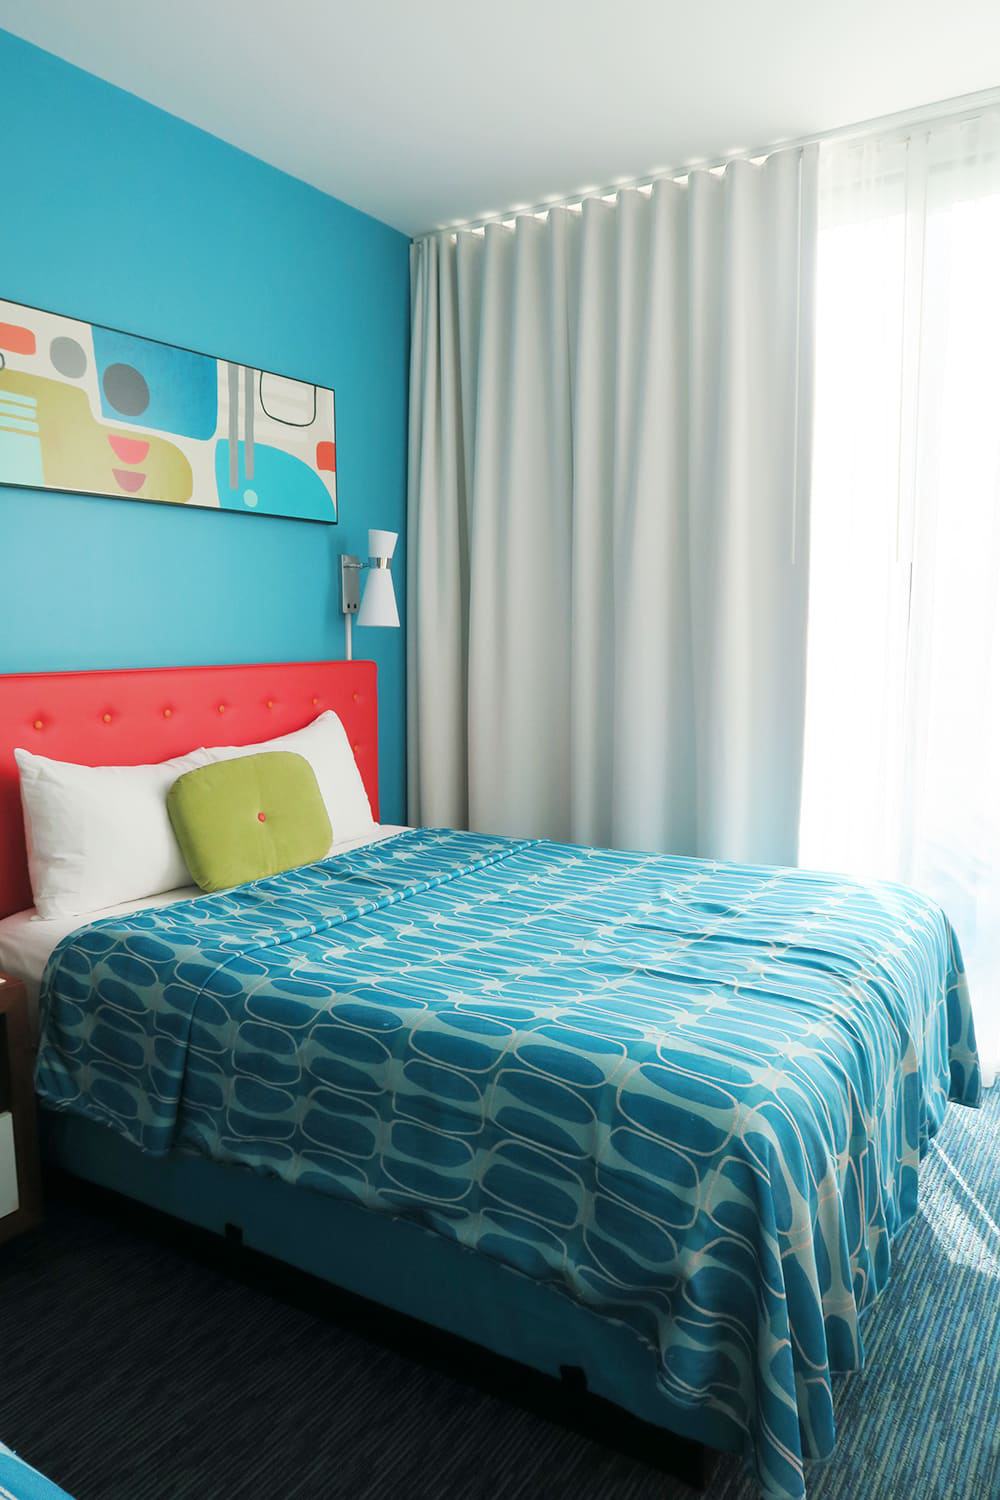 Not sure where to stay when visiting Universal Studios Orlando? See why we think Cabana Bay is the best on-site resort, especially for families!